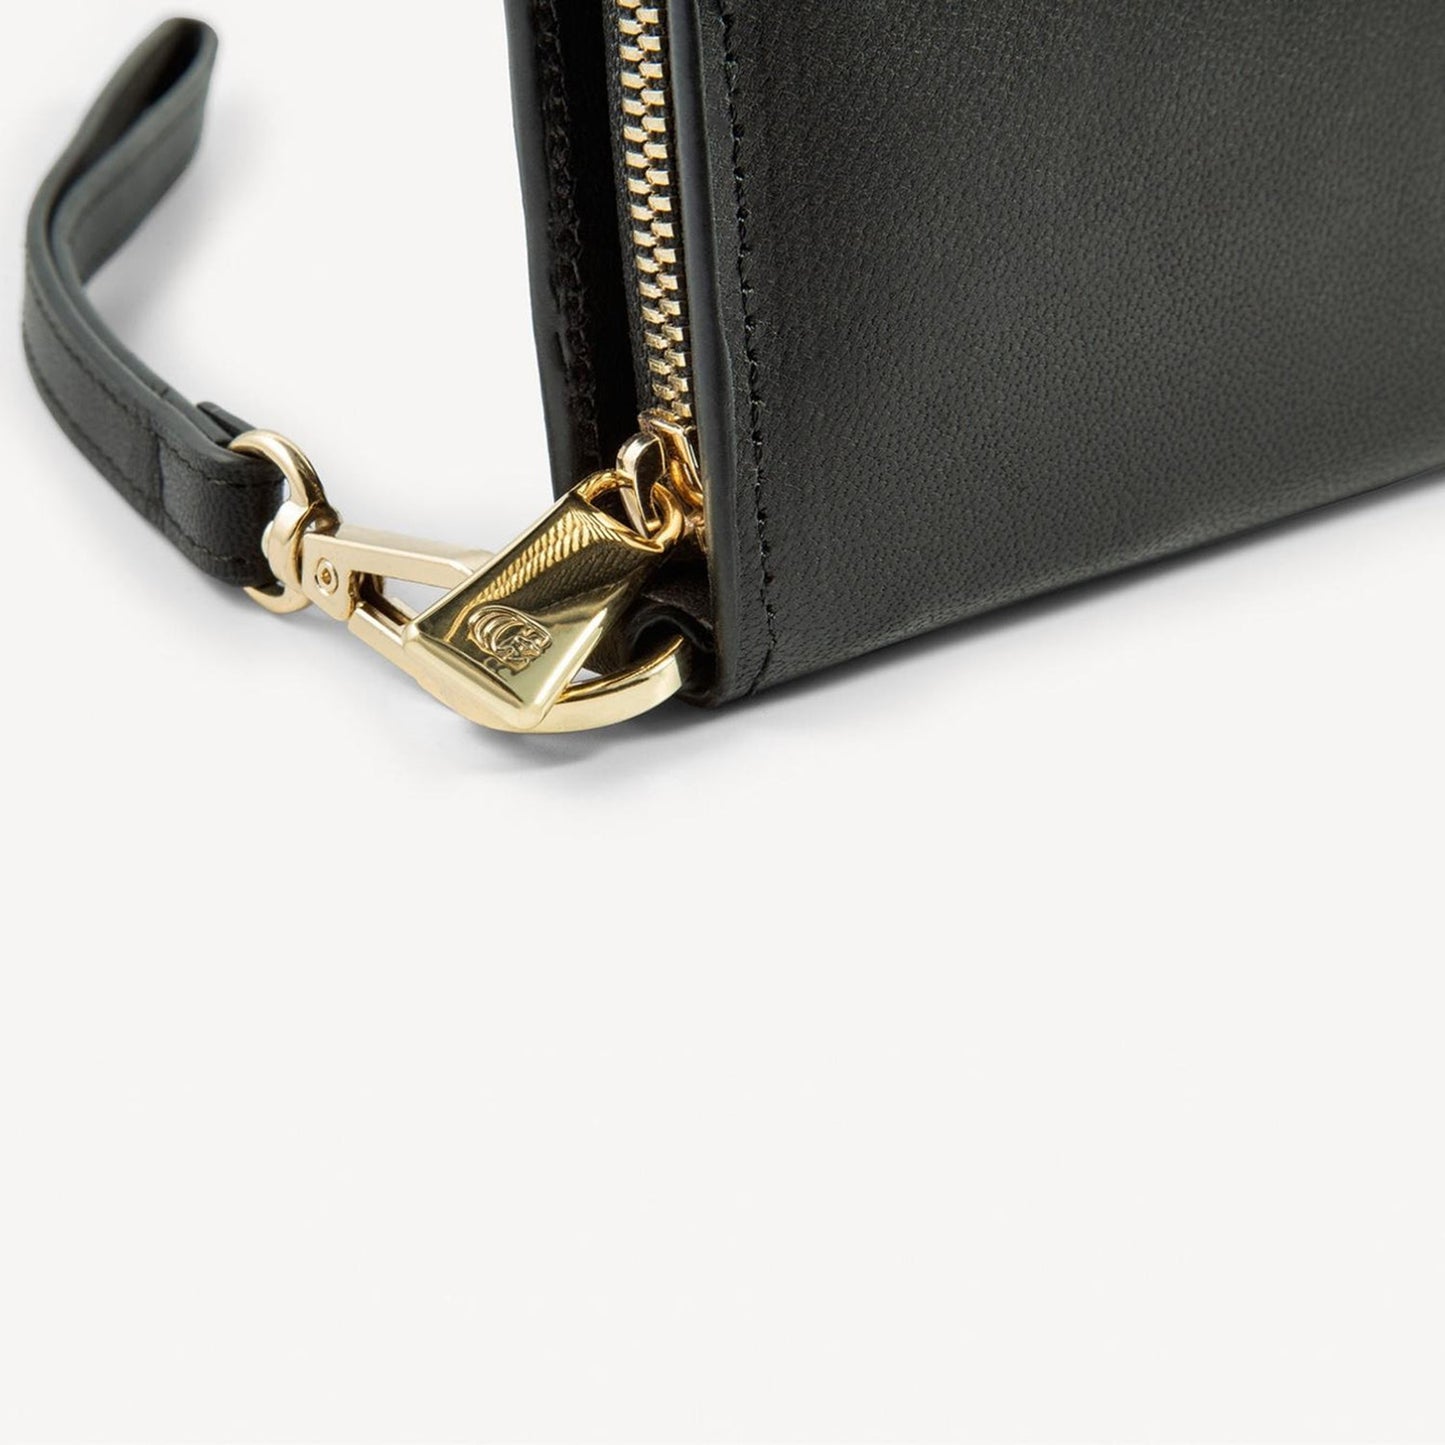 Zippy Large Wallet-Cecily Clune